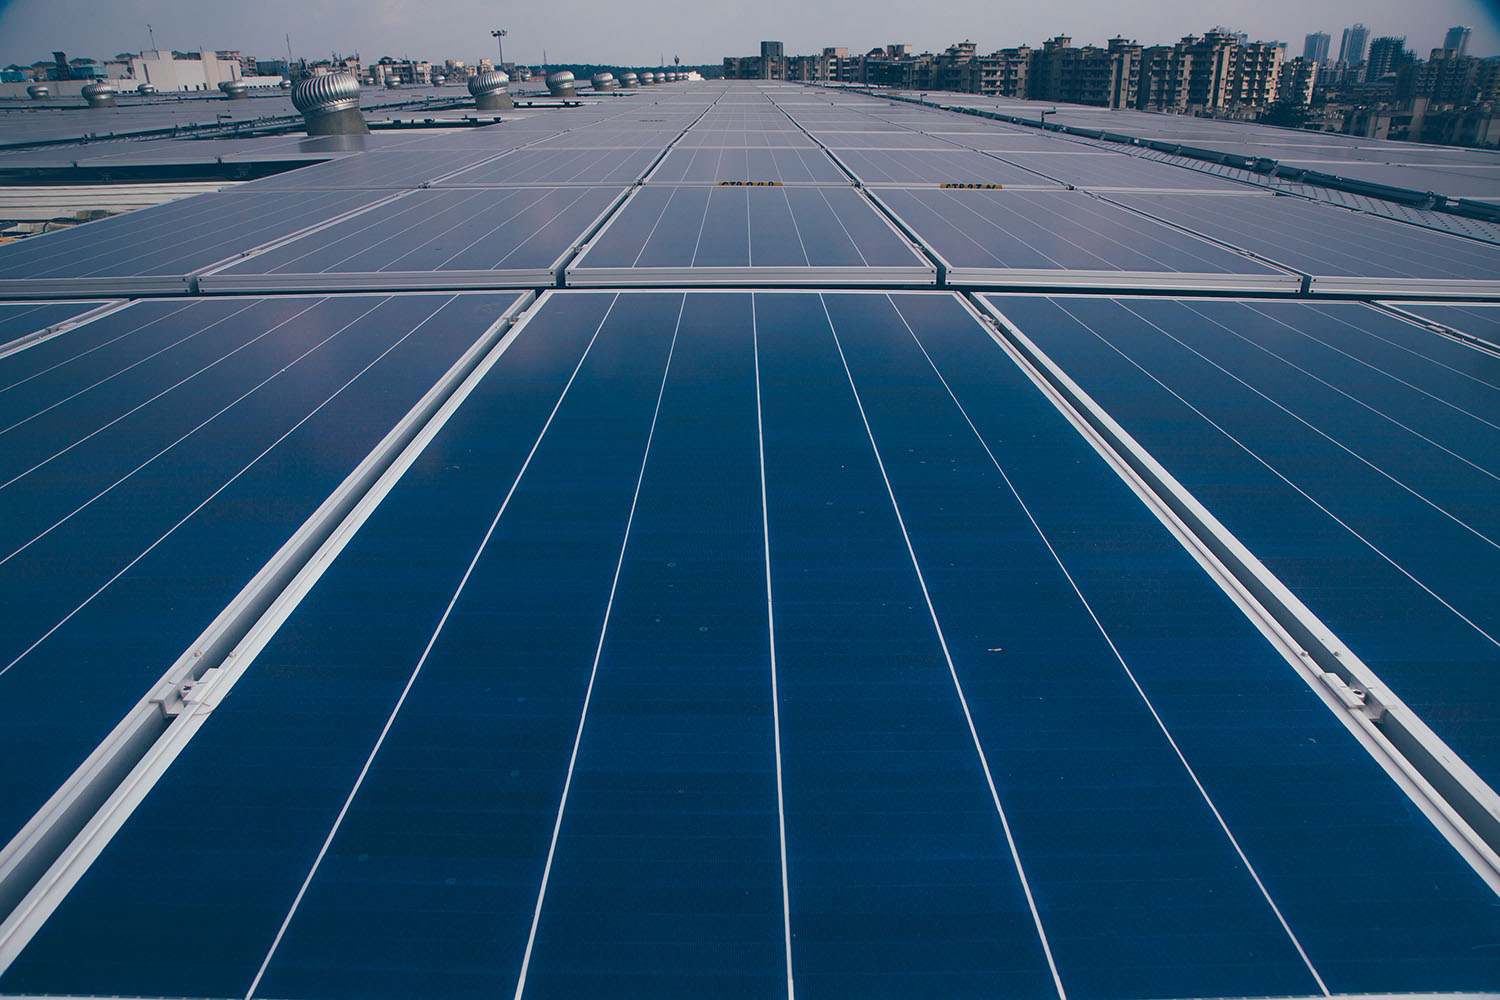 Showa India - 100 kWp capacity rooftop solar plant by Amplus